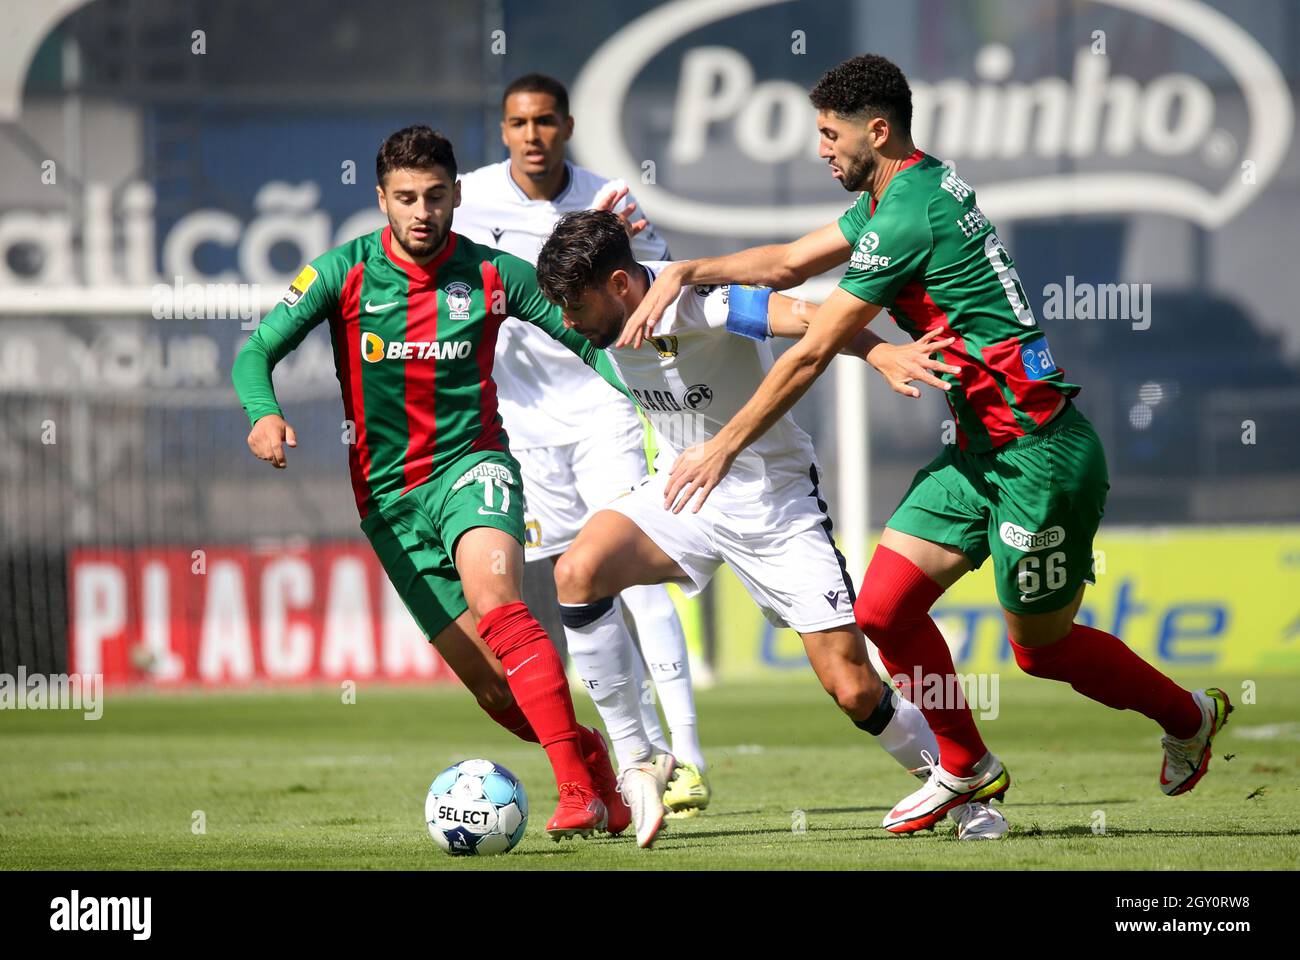 FAMALICAO, PORTUGAL - SEPTEMBER 18: Ivo Rodrigues of FC Famalicao competes for the ball with Bruno Xadas and Leo Andrade of CS Maritimo ,during the Liga Portugal Bwin match between FC Famalicao and CS Maritimo at Estadio Municipal on September 18, 2021 in Famalicao, Portugal. (Photo by MB Media) Stock Photo